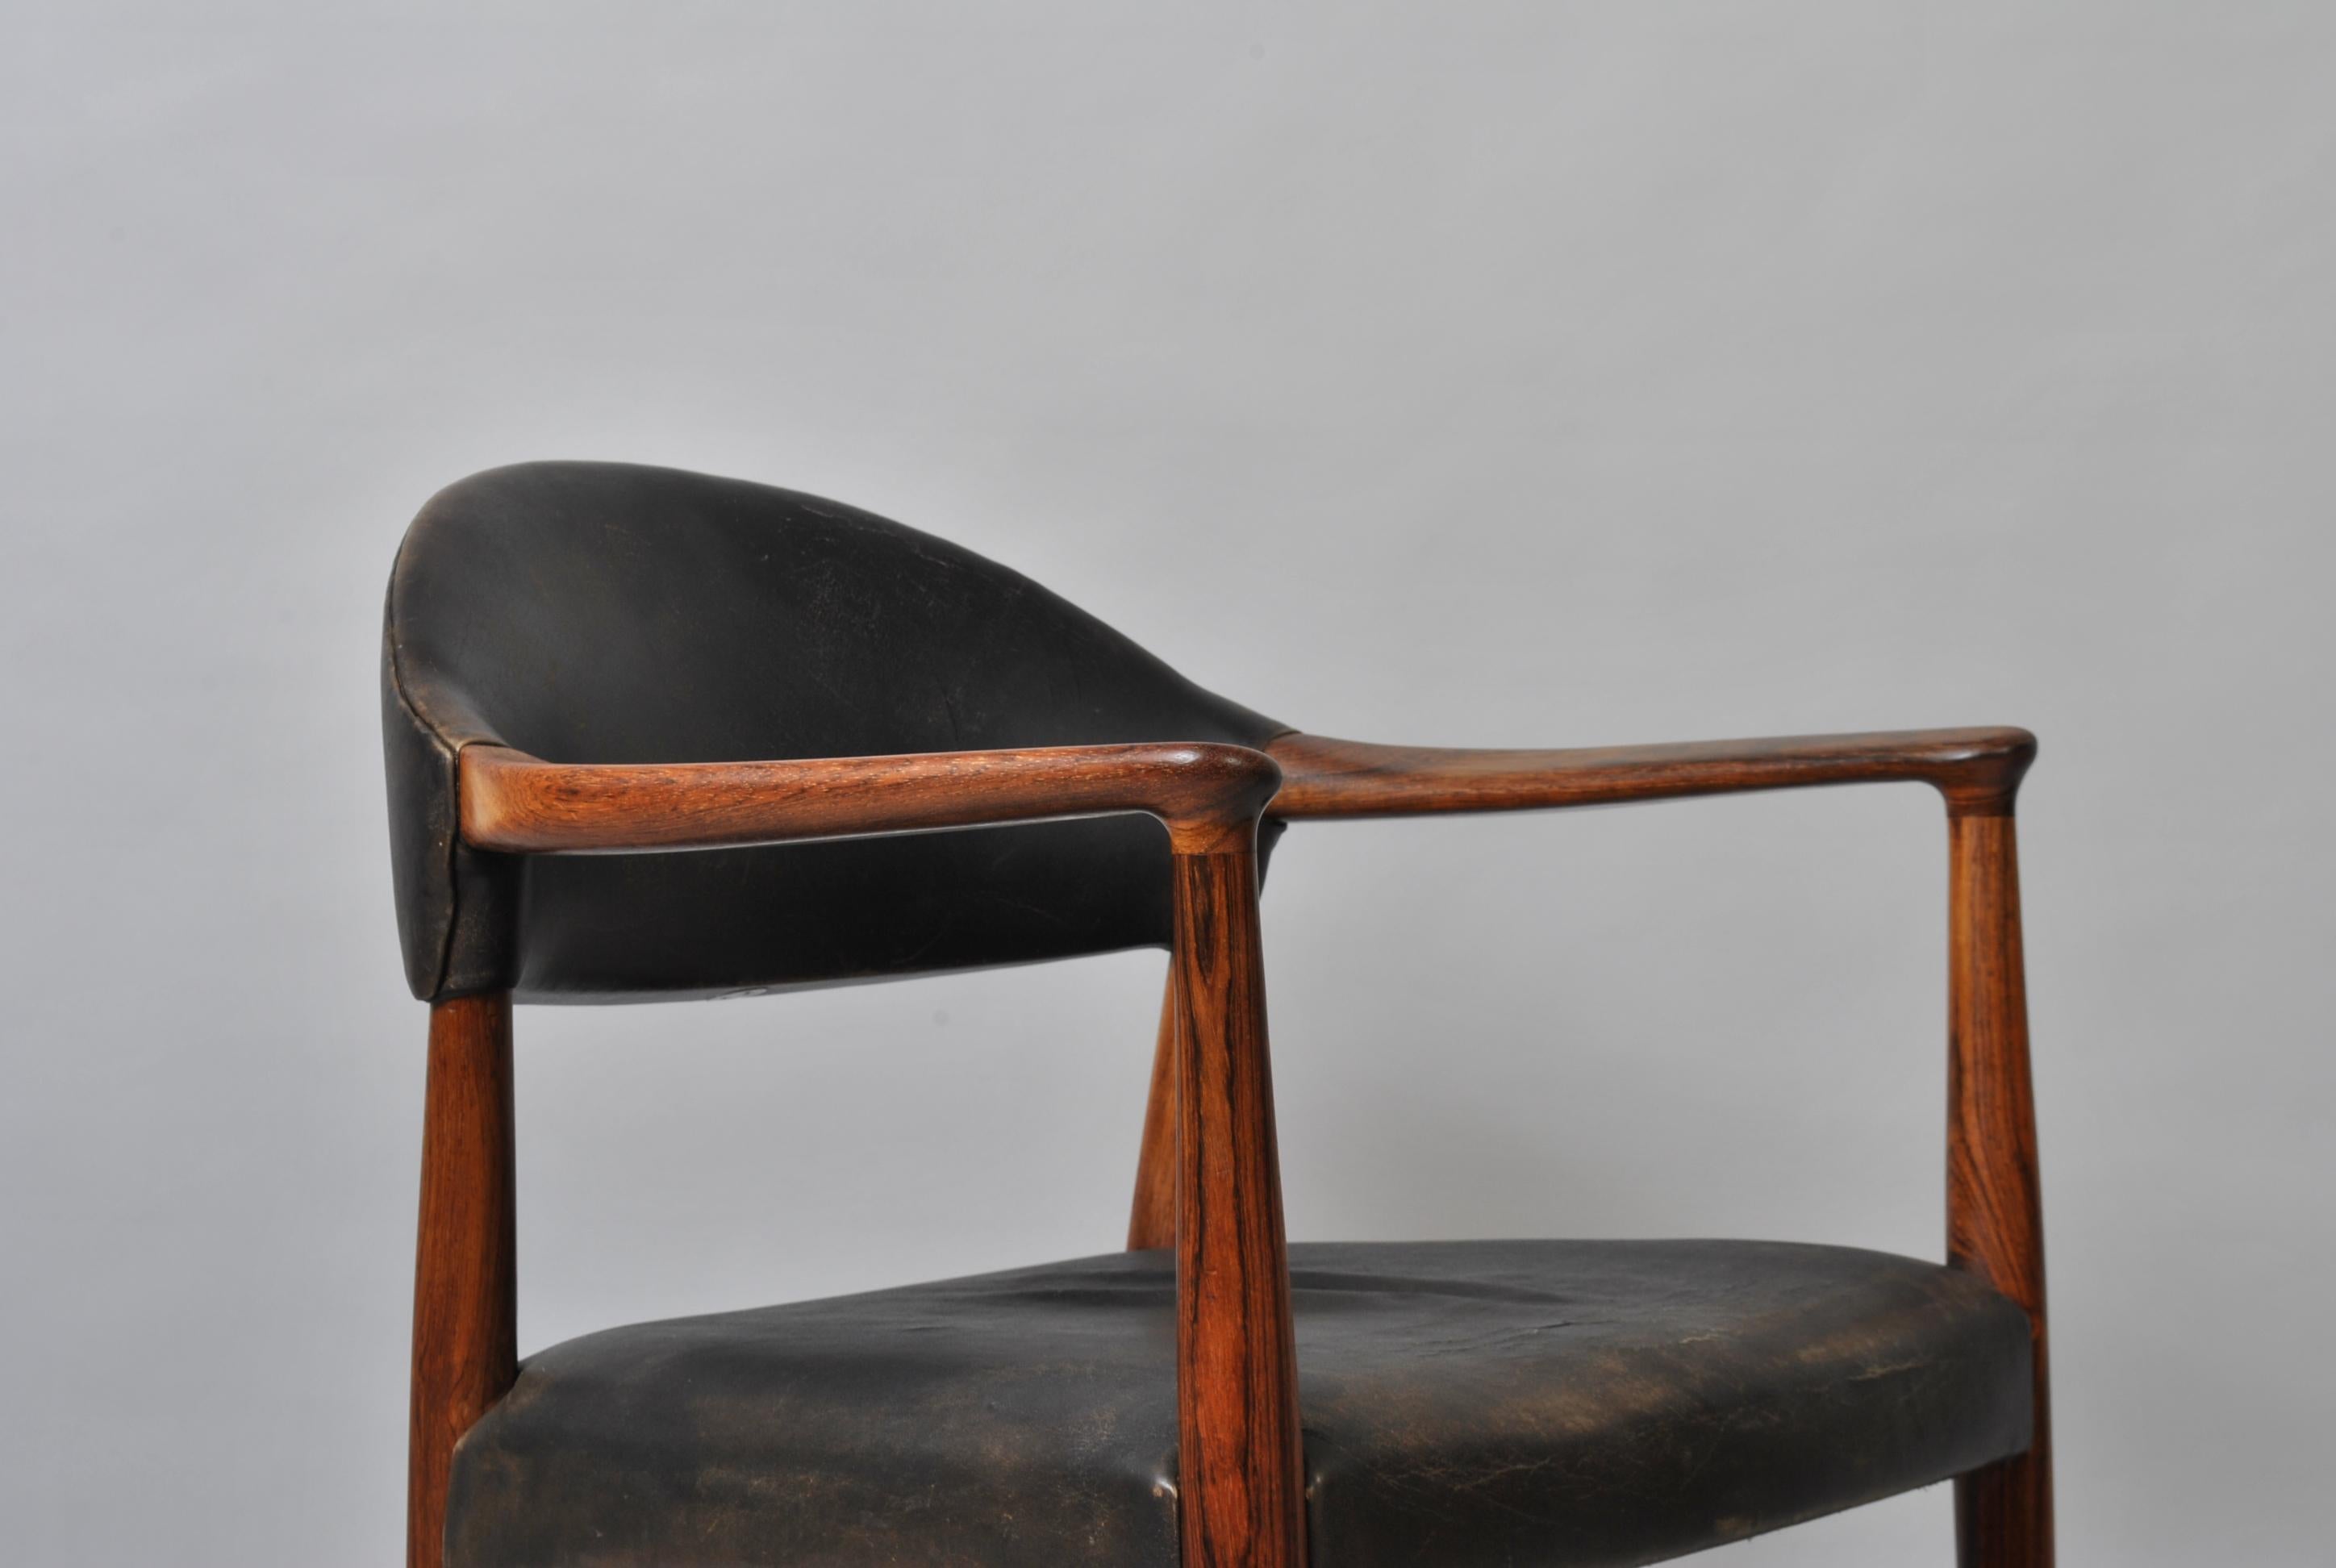 Classic midcentury elbow chair by Kurt Olsen for Slagelse Møbelfabrik. Incredible wood frame. Black/aged leather. We can reupholster to your requirements if preferred. Denmark, circa 1950. Very comfortable indeed.